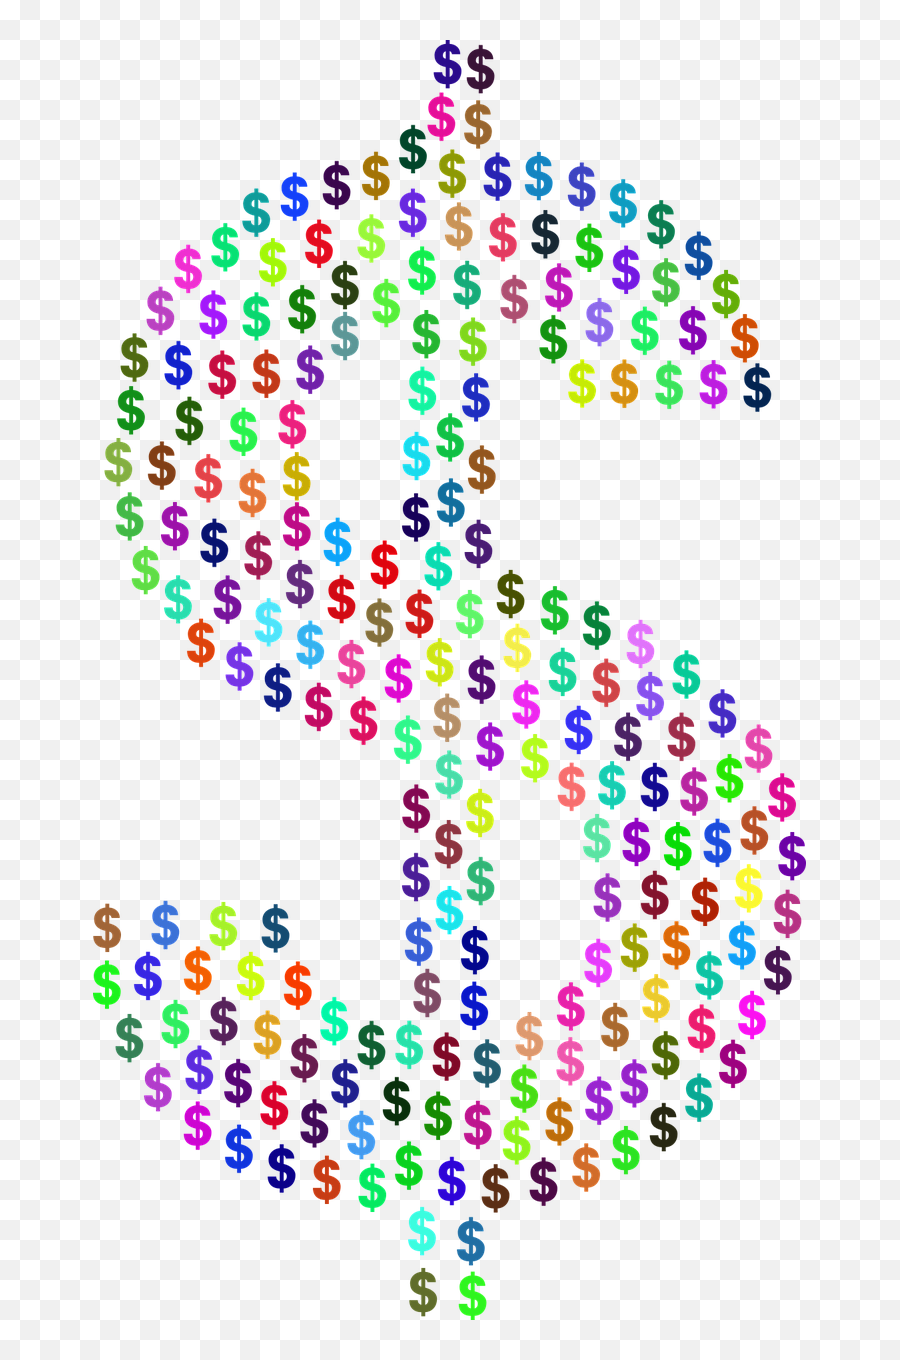 Dollar Sign Fractal Money - Free Vector Graphic On Pixabay Colorful Money Icon Png,Greed Icon